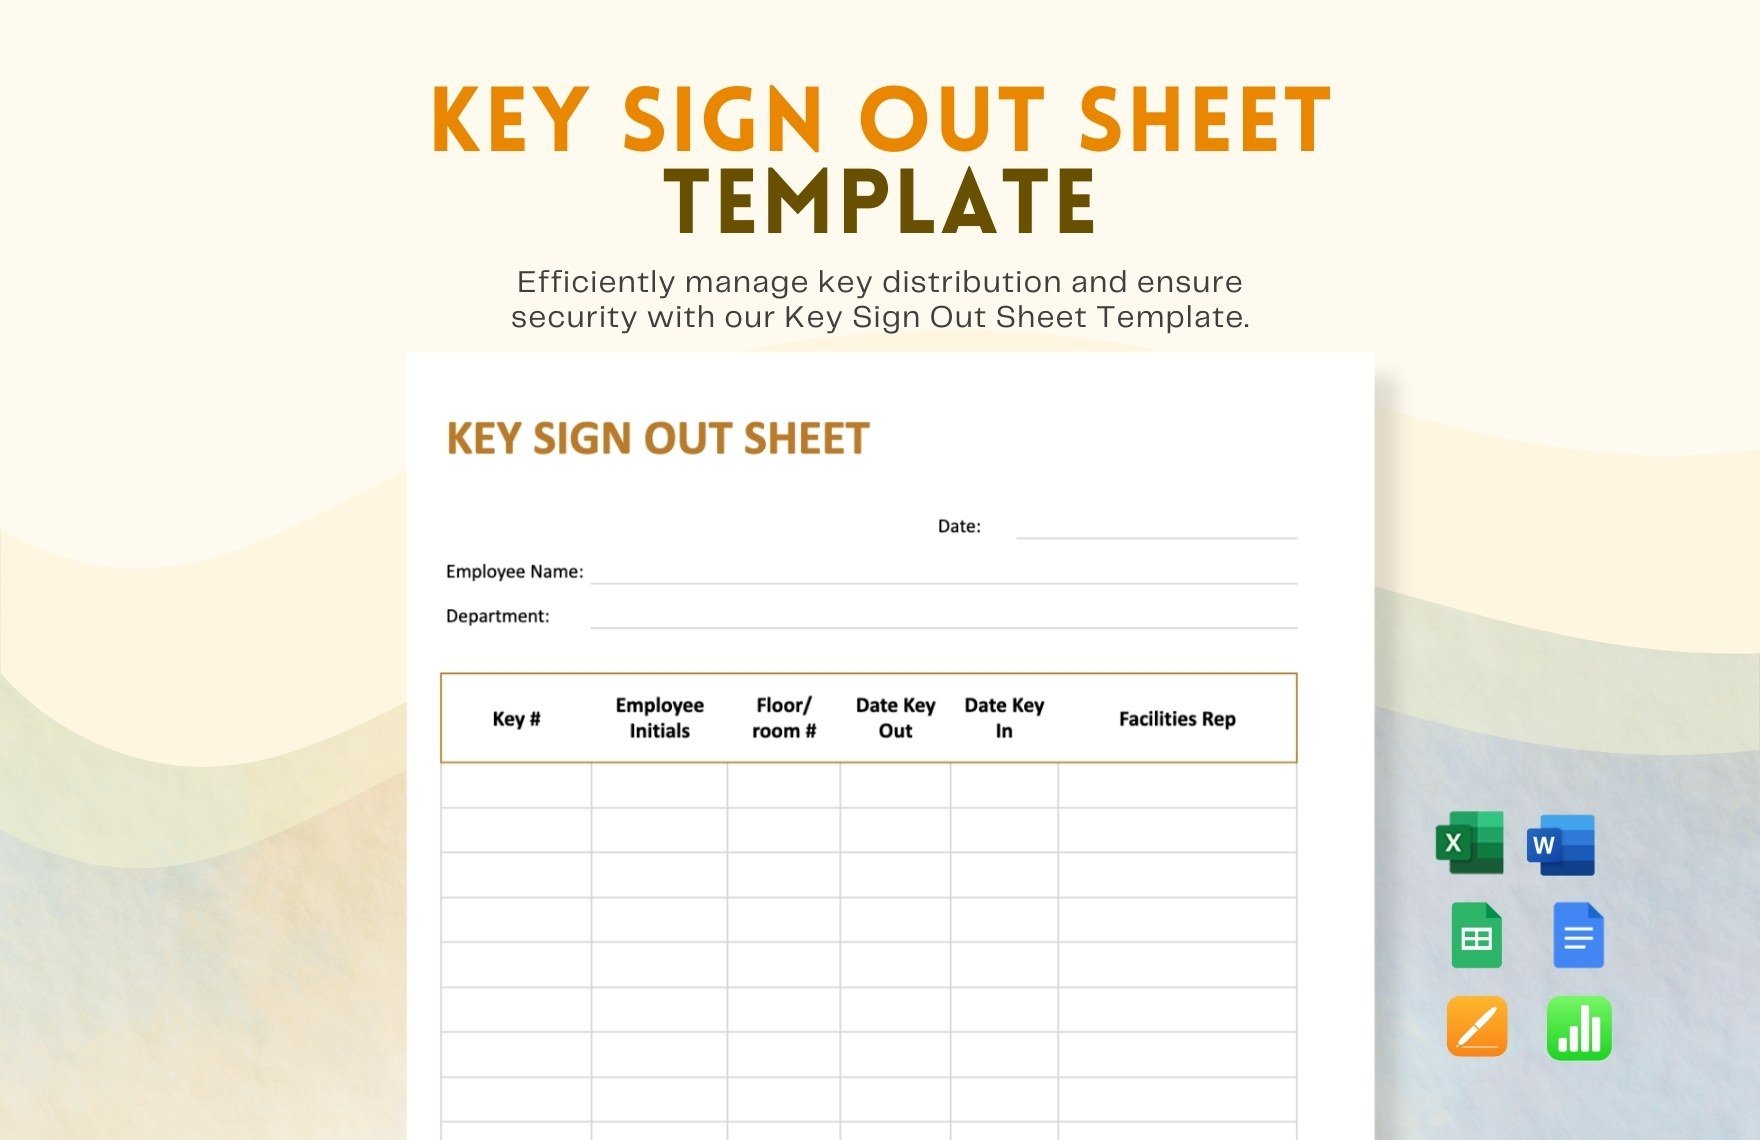 Key Sign Out Sheet Template in Word, Google Docs, Excel, Google Sheets, Apple Pages, Apple Numbers